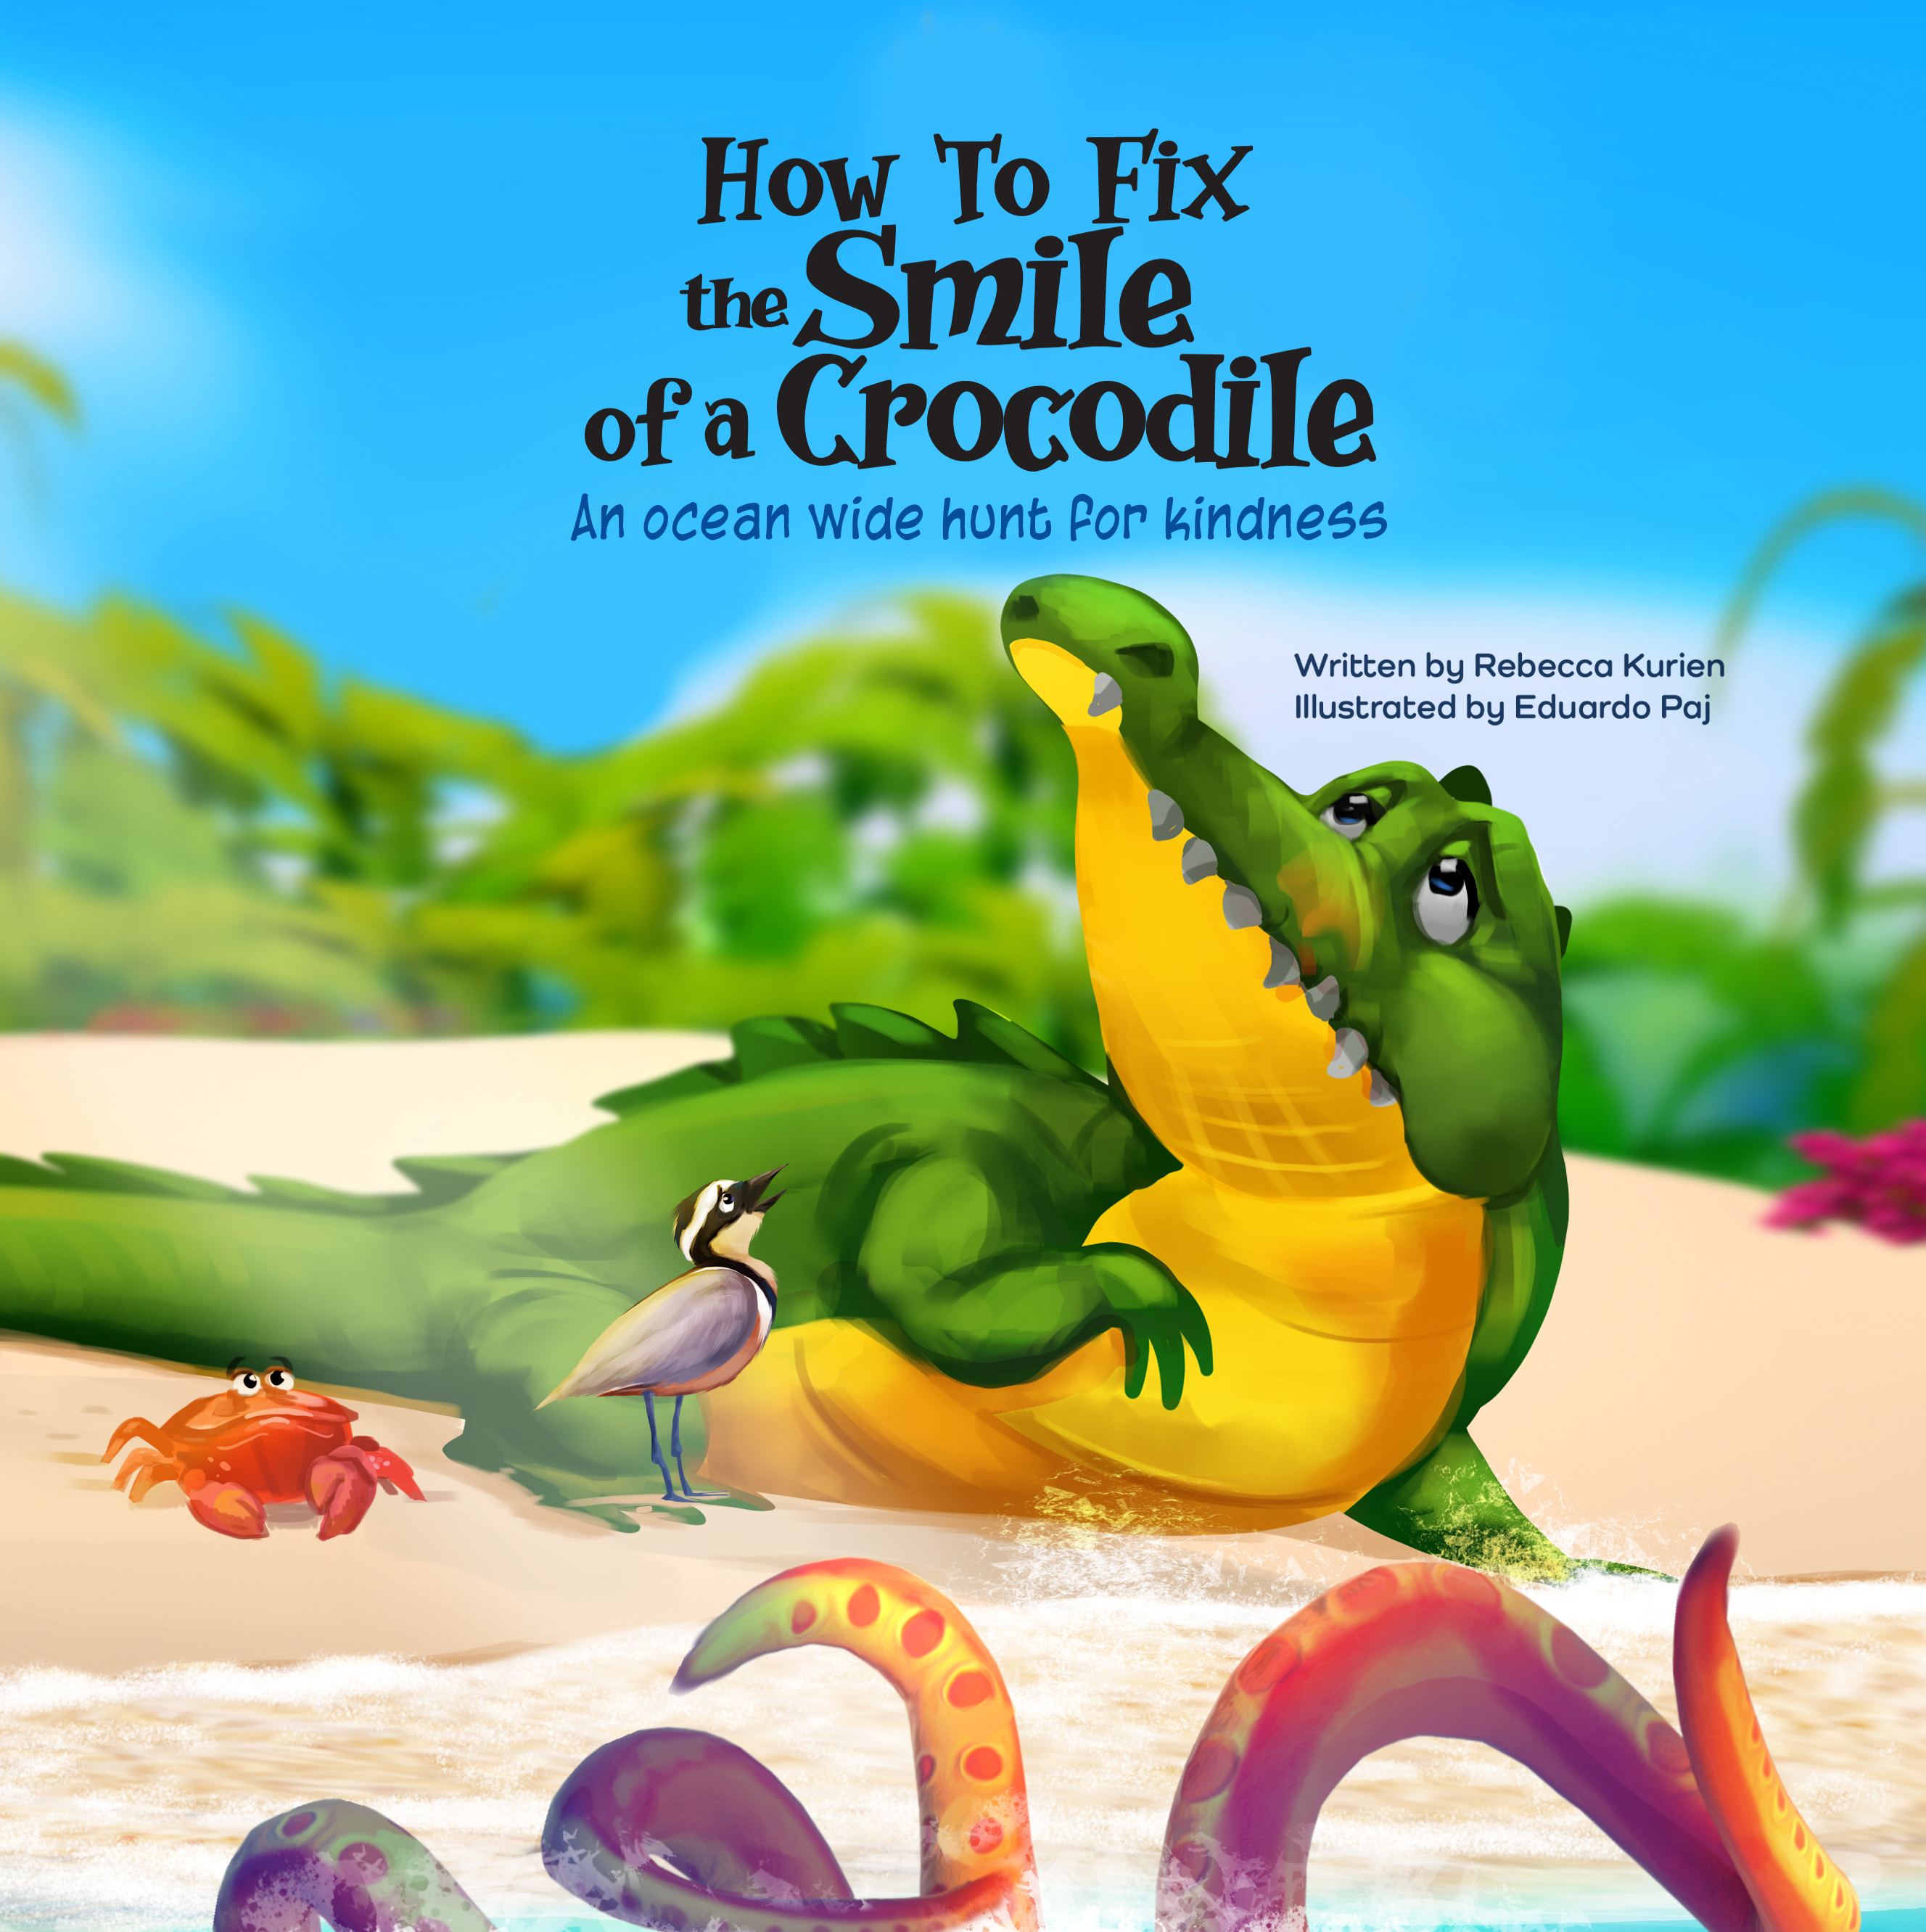 How to Fix the Smile of a Crocodile by Rebecca Kurien